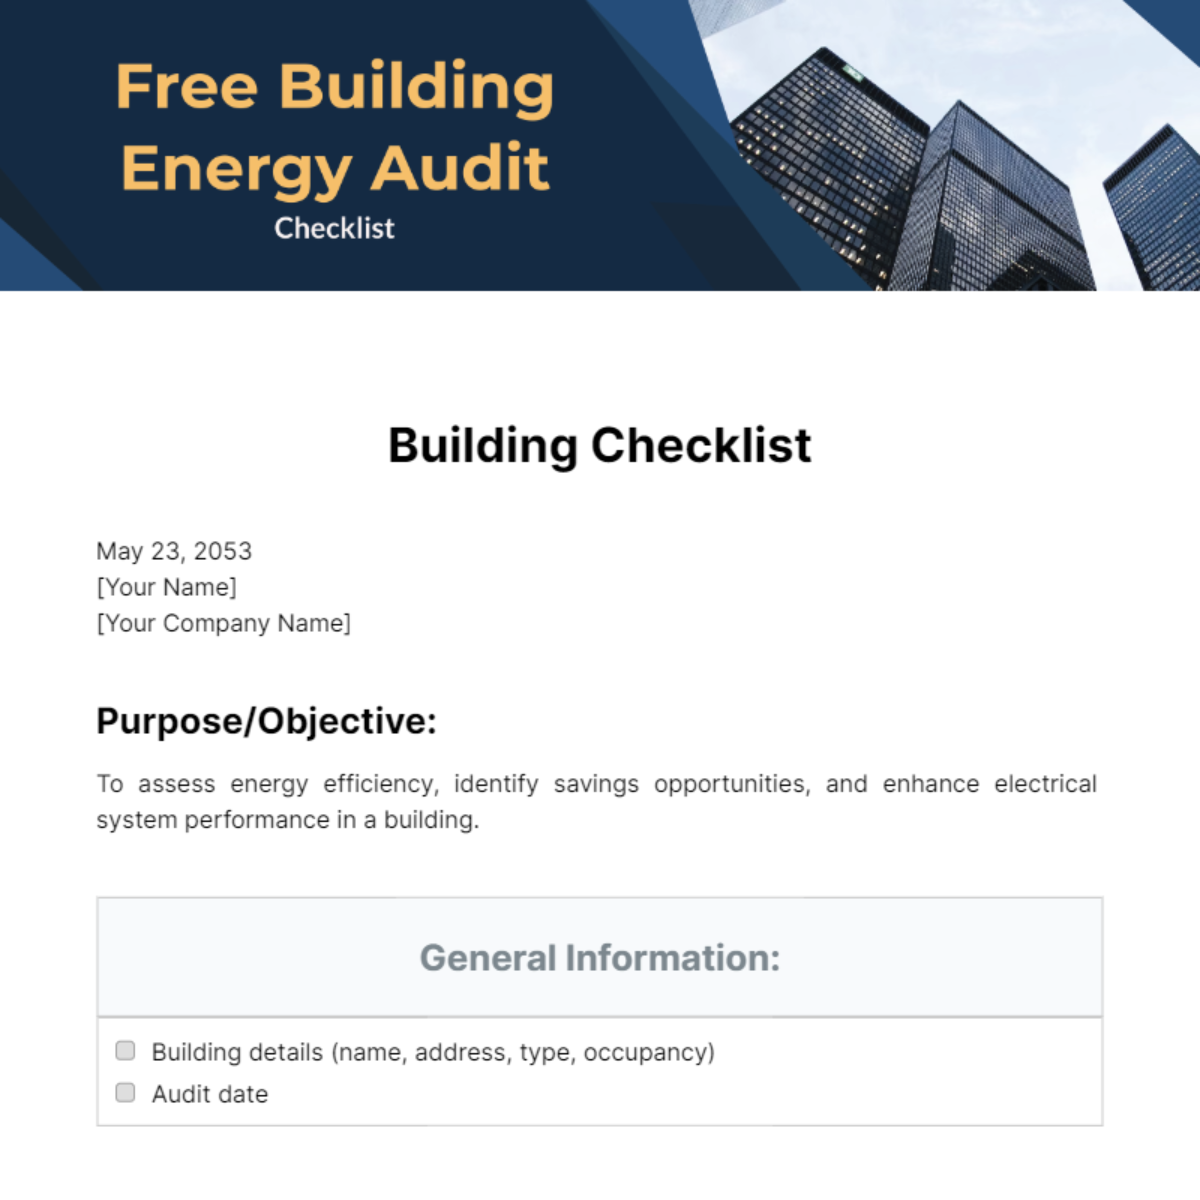 Free Building Energy Audit Checklist Template